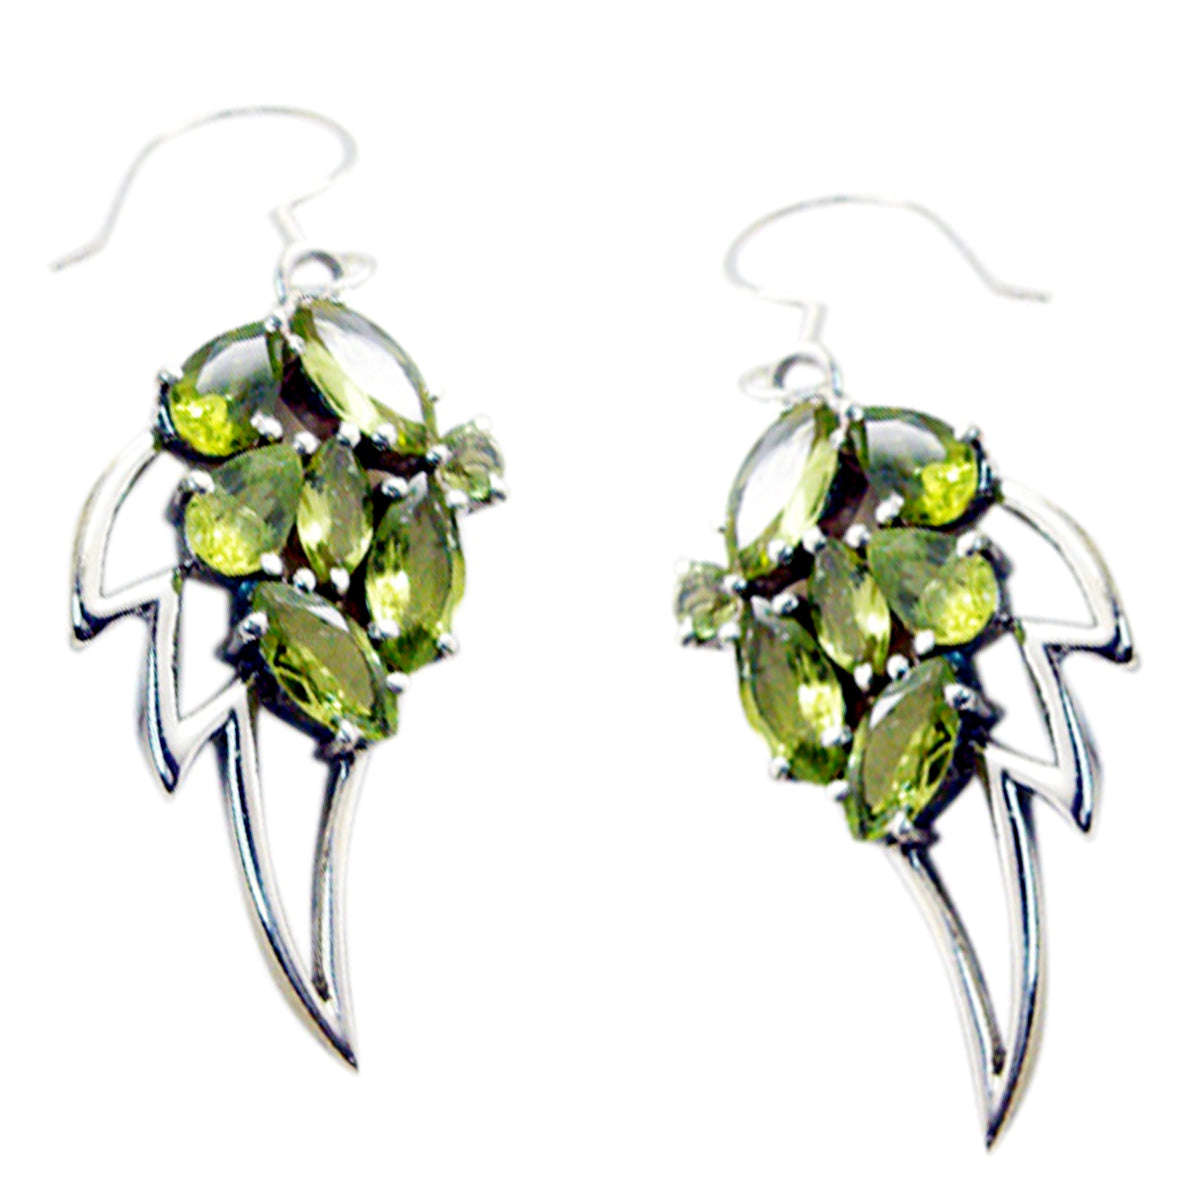 Riyo Natural Gemstone multi shape Faceted Green Peridot Silver Earrings gift for Faishonable day